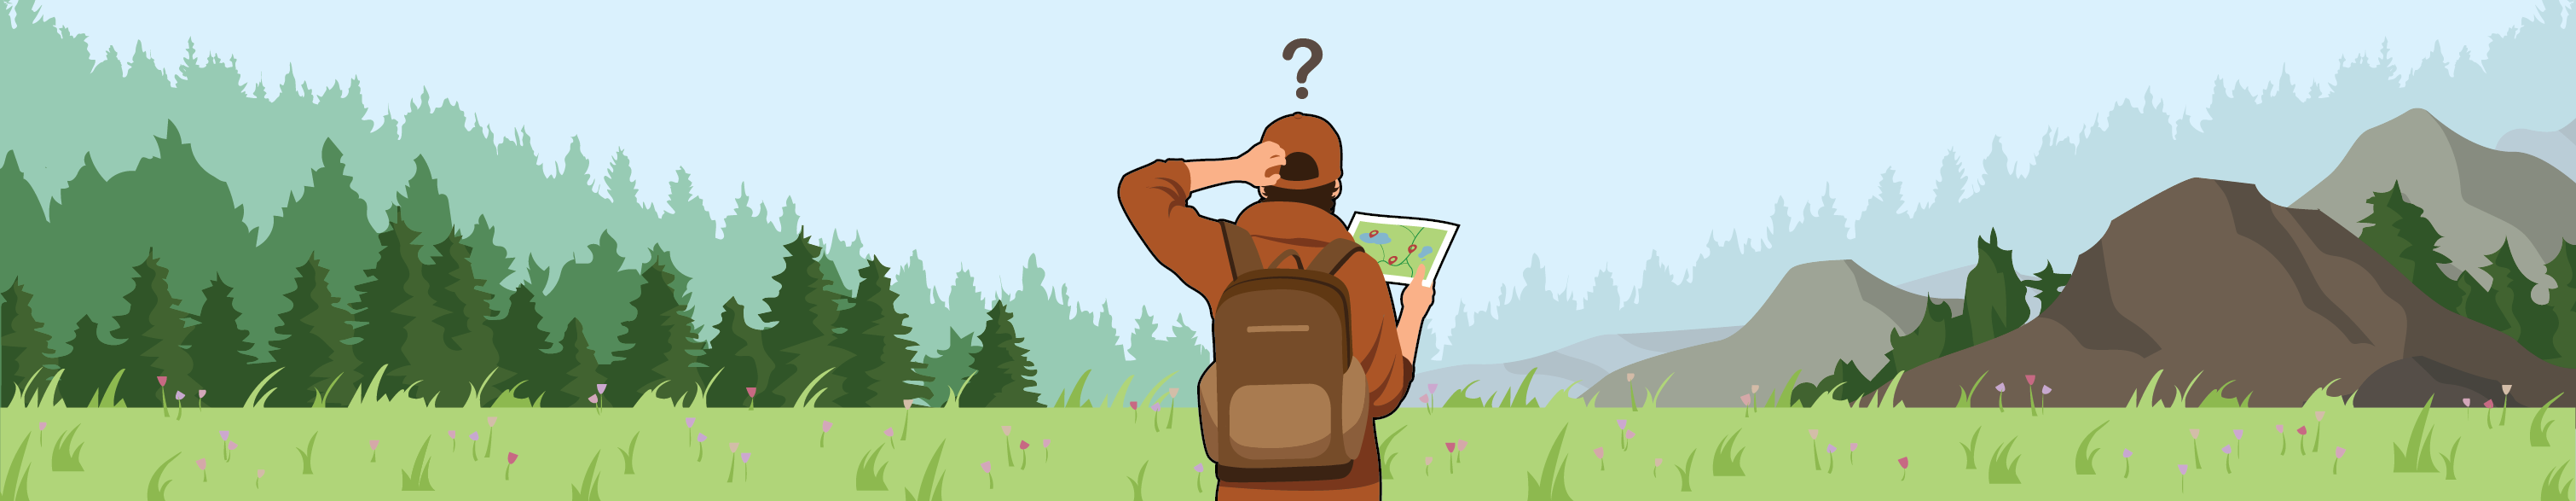 A visitor holding a map, wearing sun protection, and a backpack stands in a field facing trees and mountains is scratching their head because they are lost and confused.